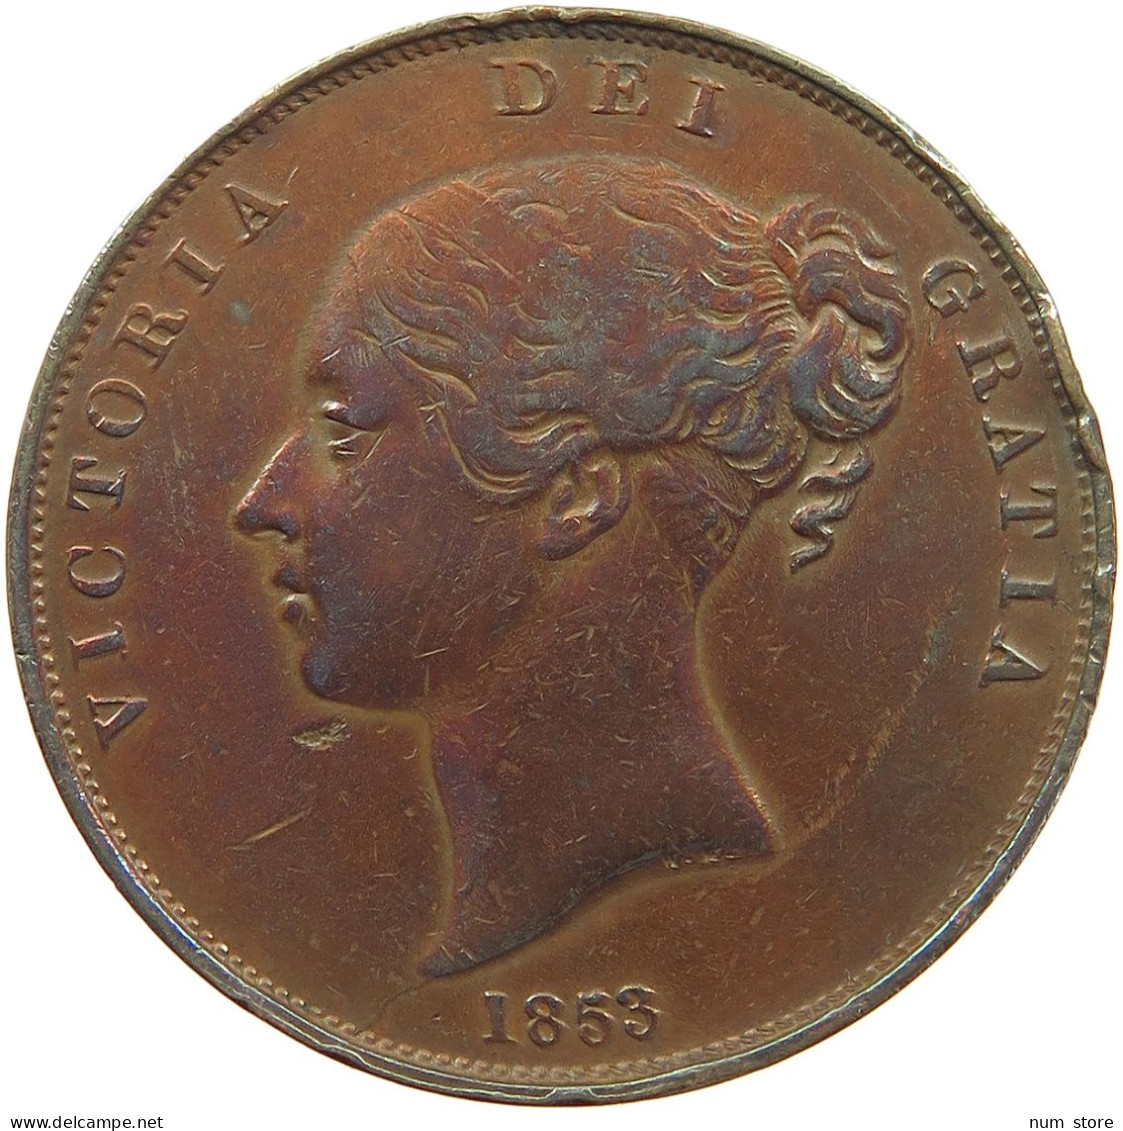 GREAT BRITAIN PENNY 1853 Victoria 1837-1901 #t107 0011 - D. 1 Penny